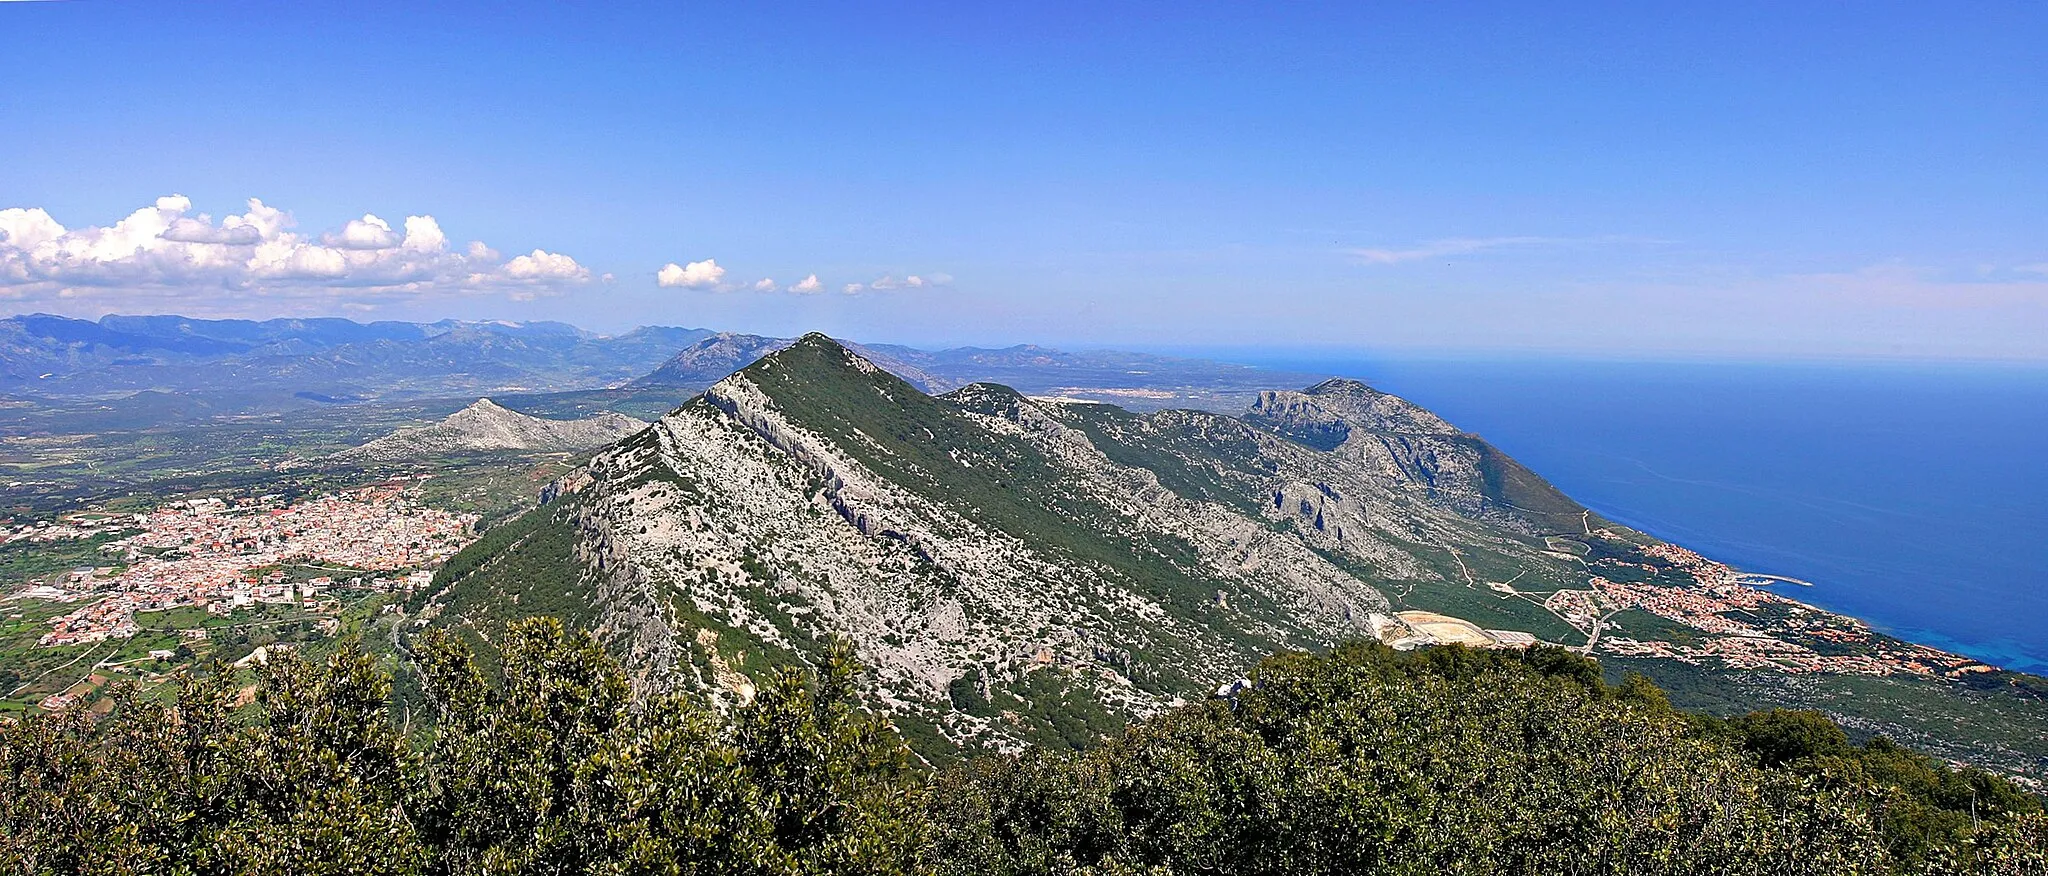 Photo showing: View over the town of Dorgali and the hamlet of Cala Gonone.